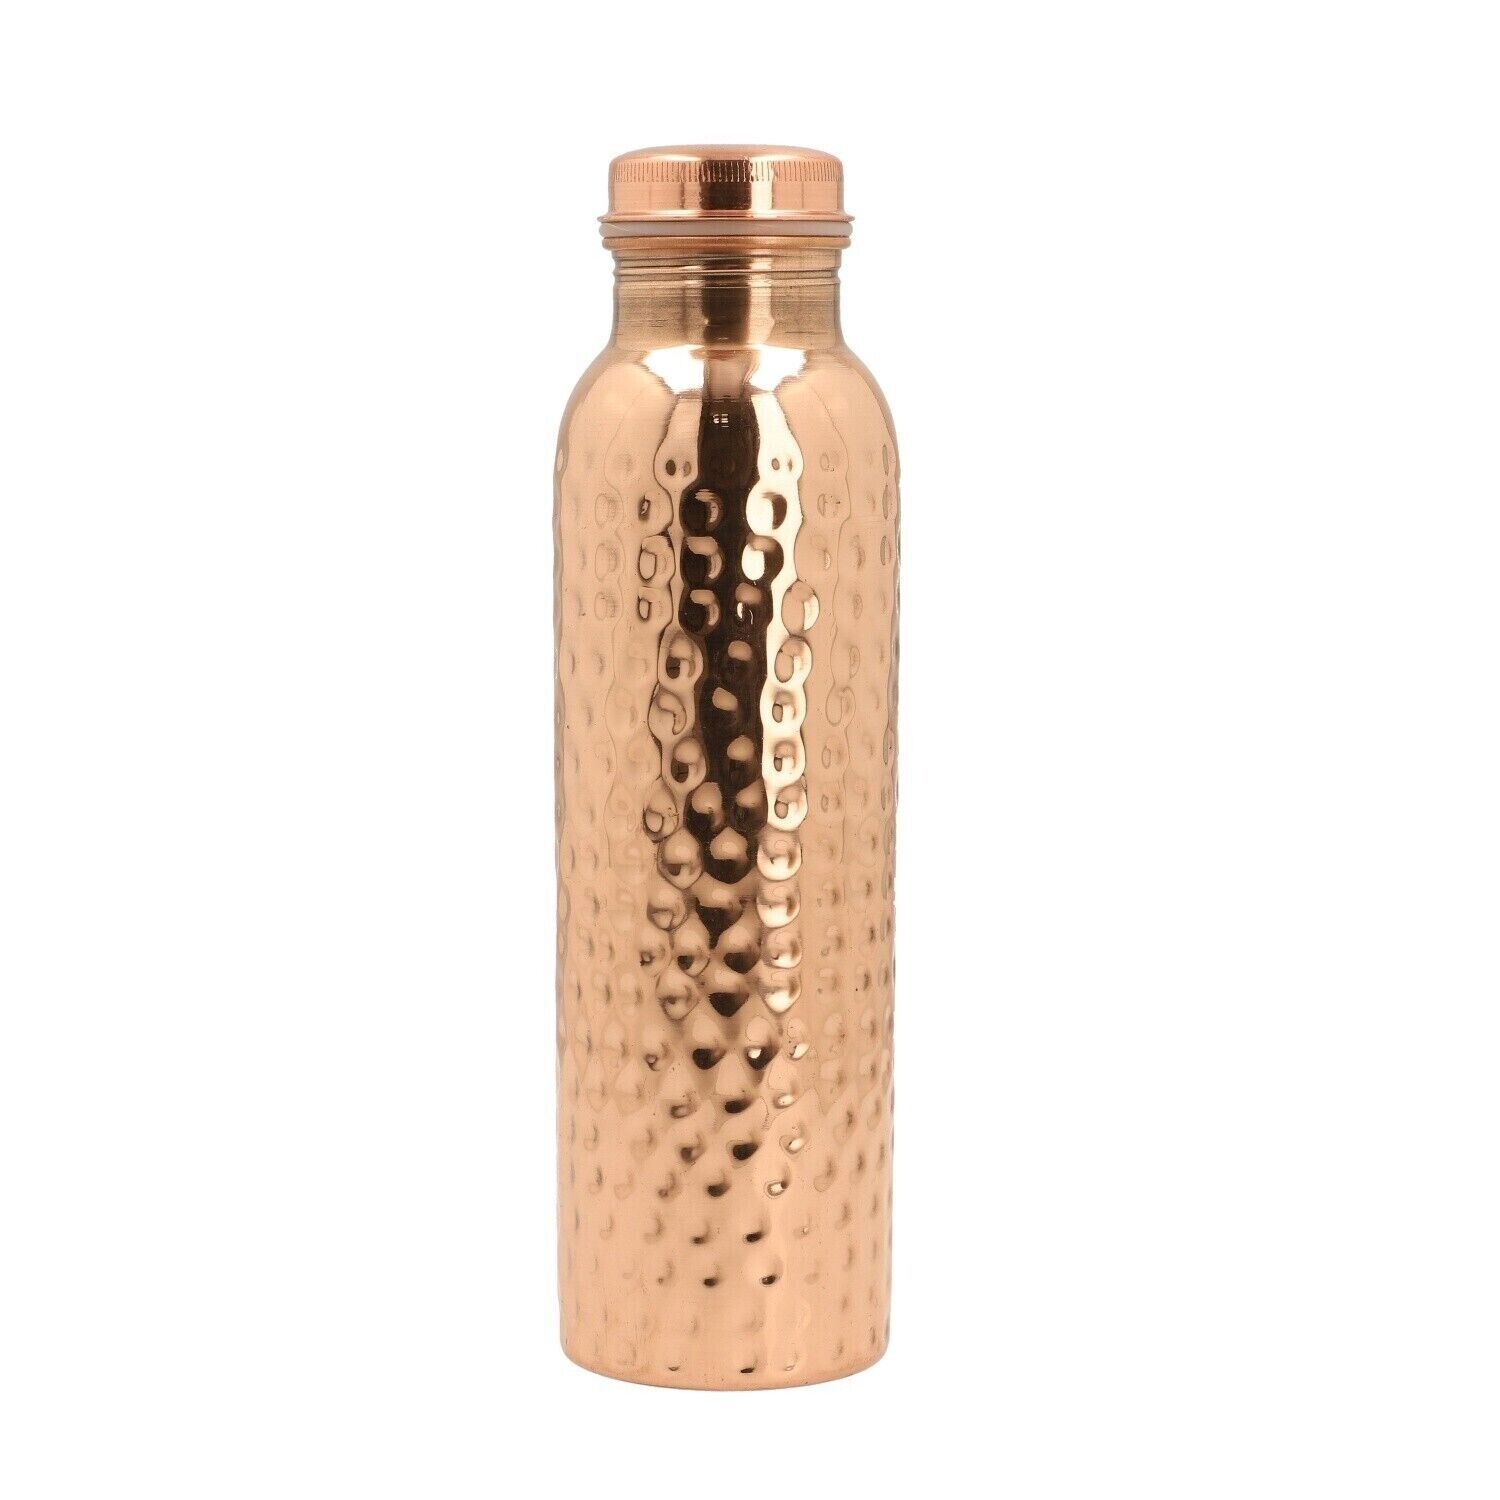 100% Pure Copper Water Bottle Handmade For Health Benefits - Fast Delivery